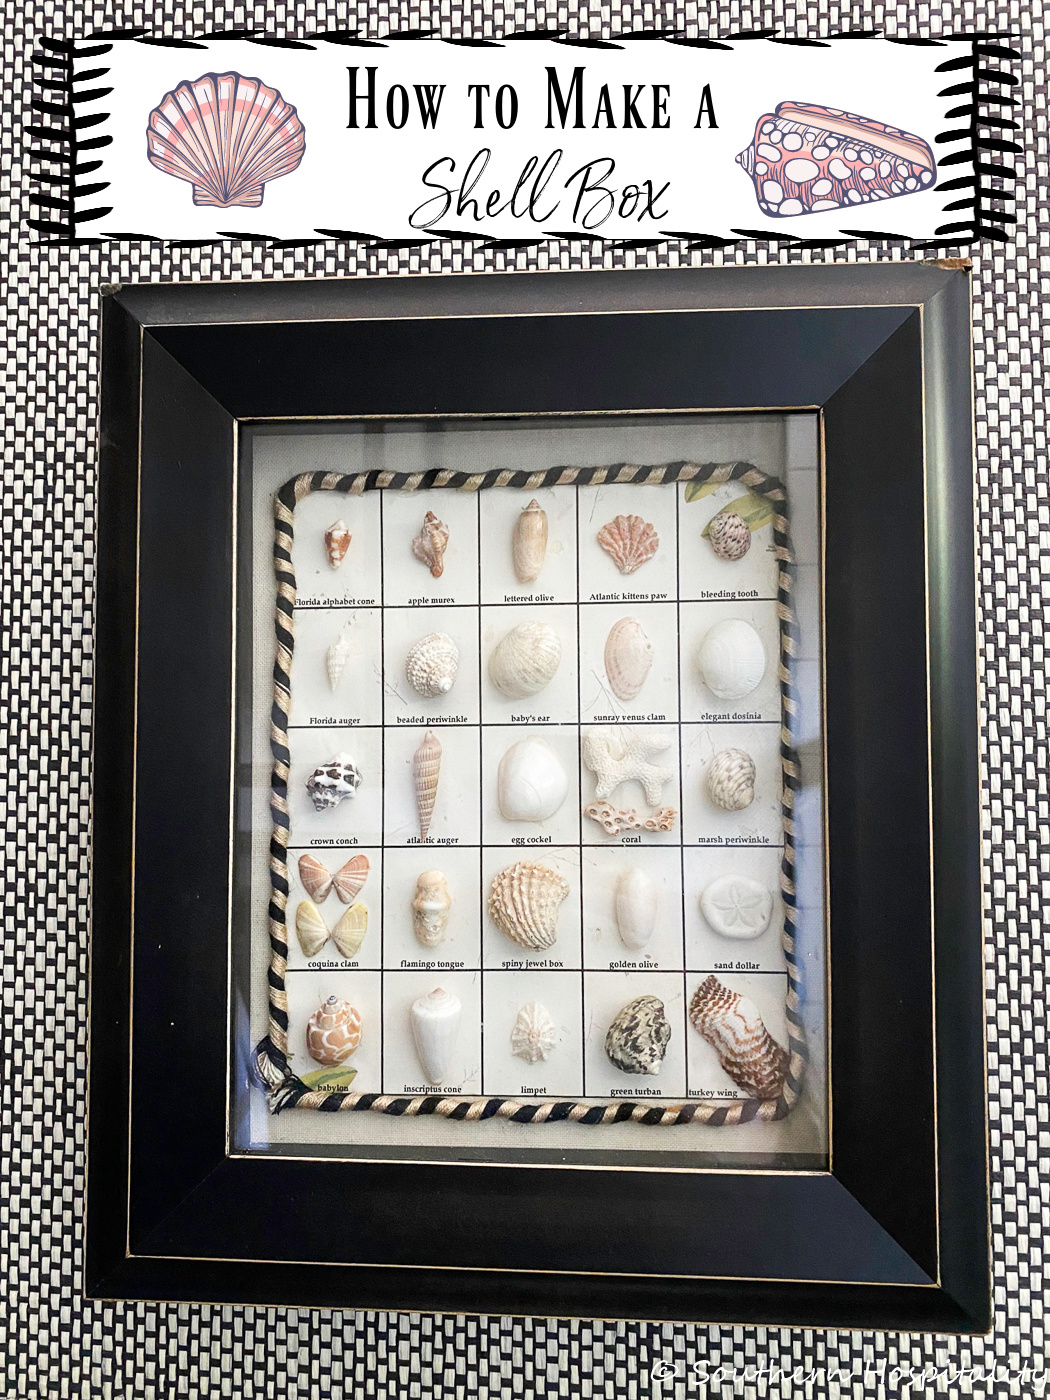 How to make a shell box